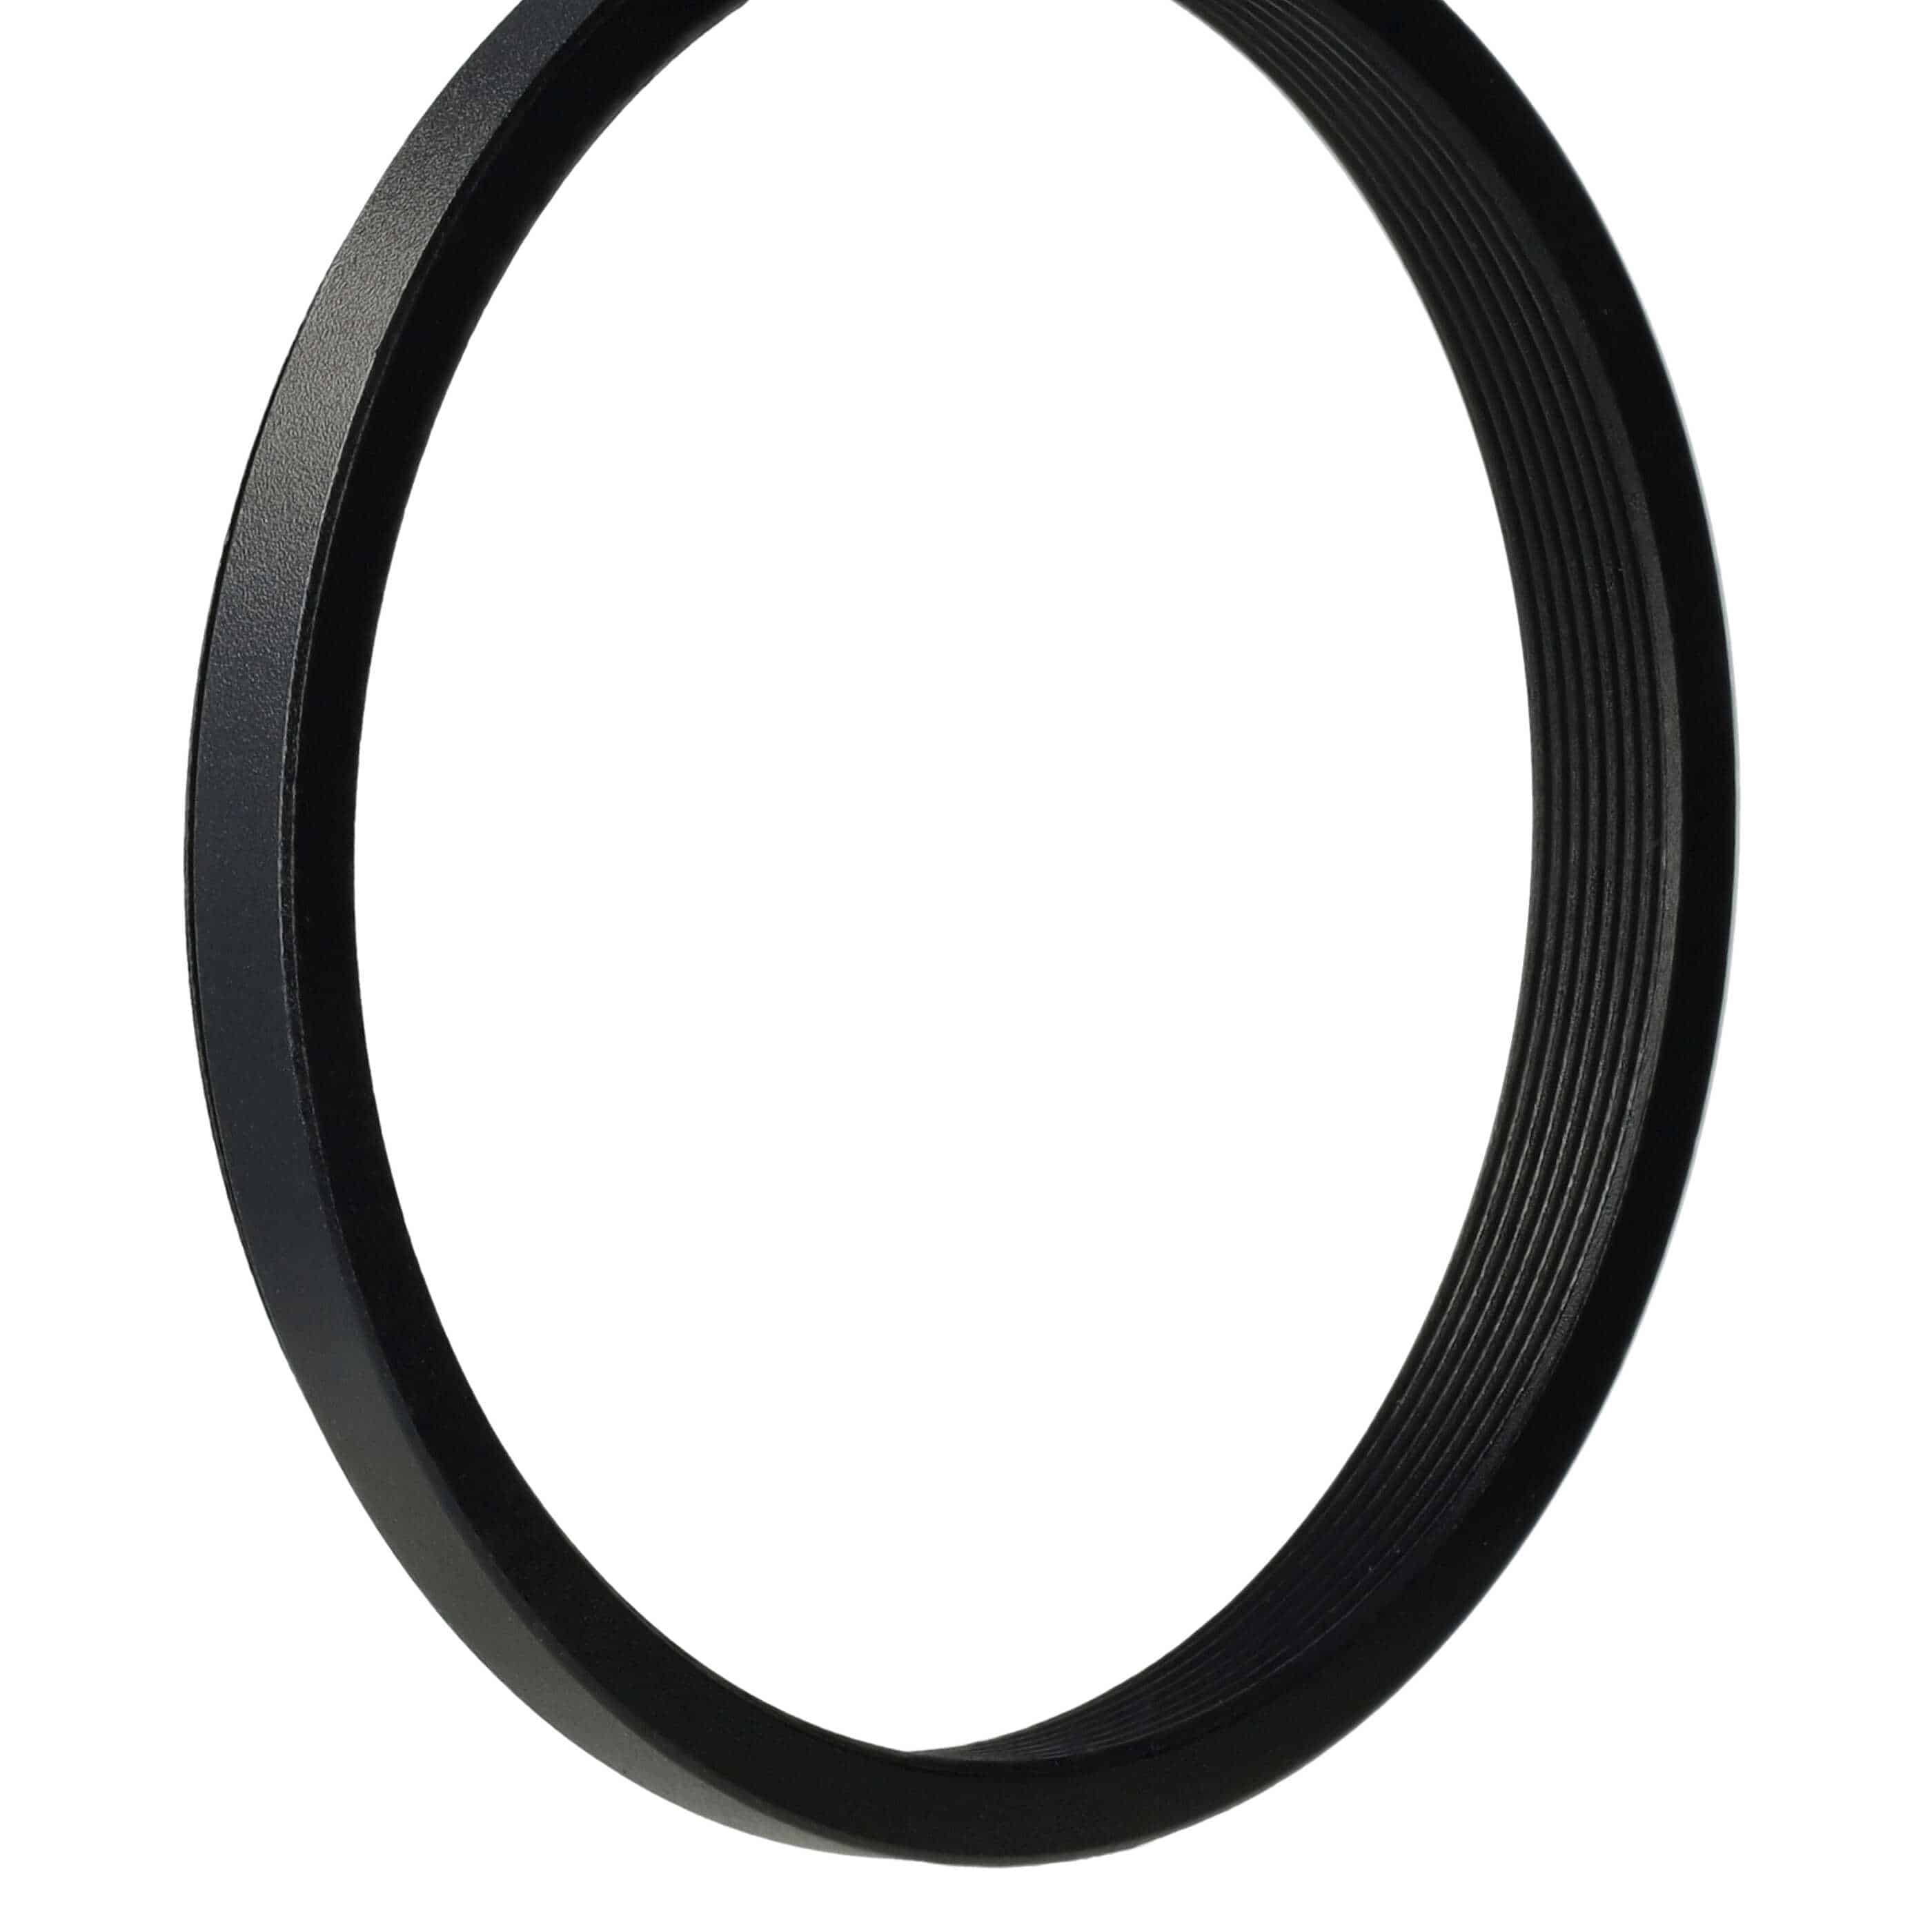 Step-Down Ring Adapter from 55 mm to 52 mm for various Camera Lenses